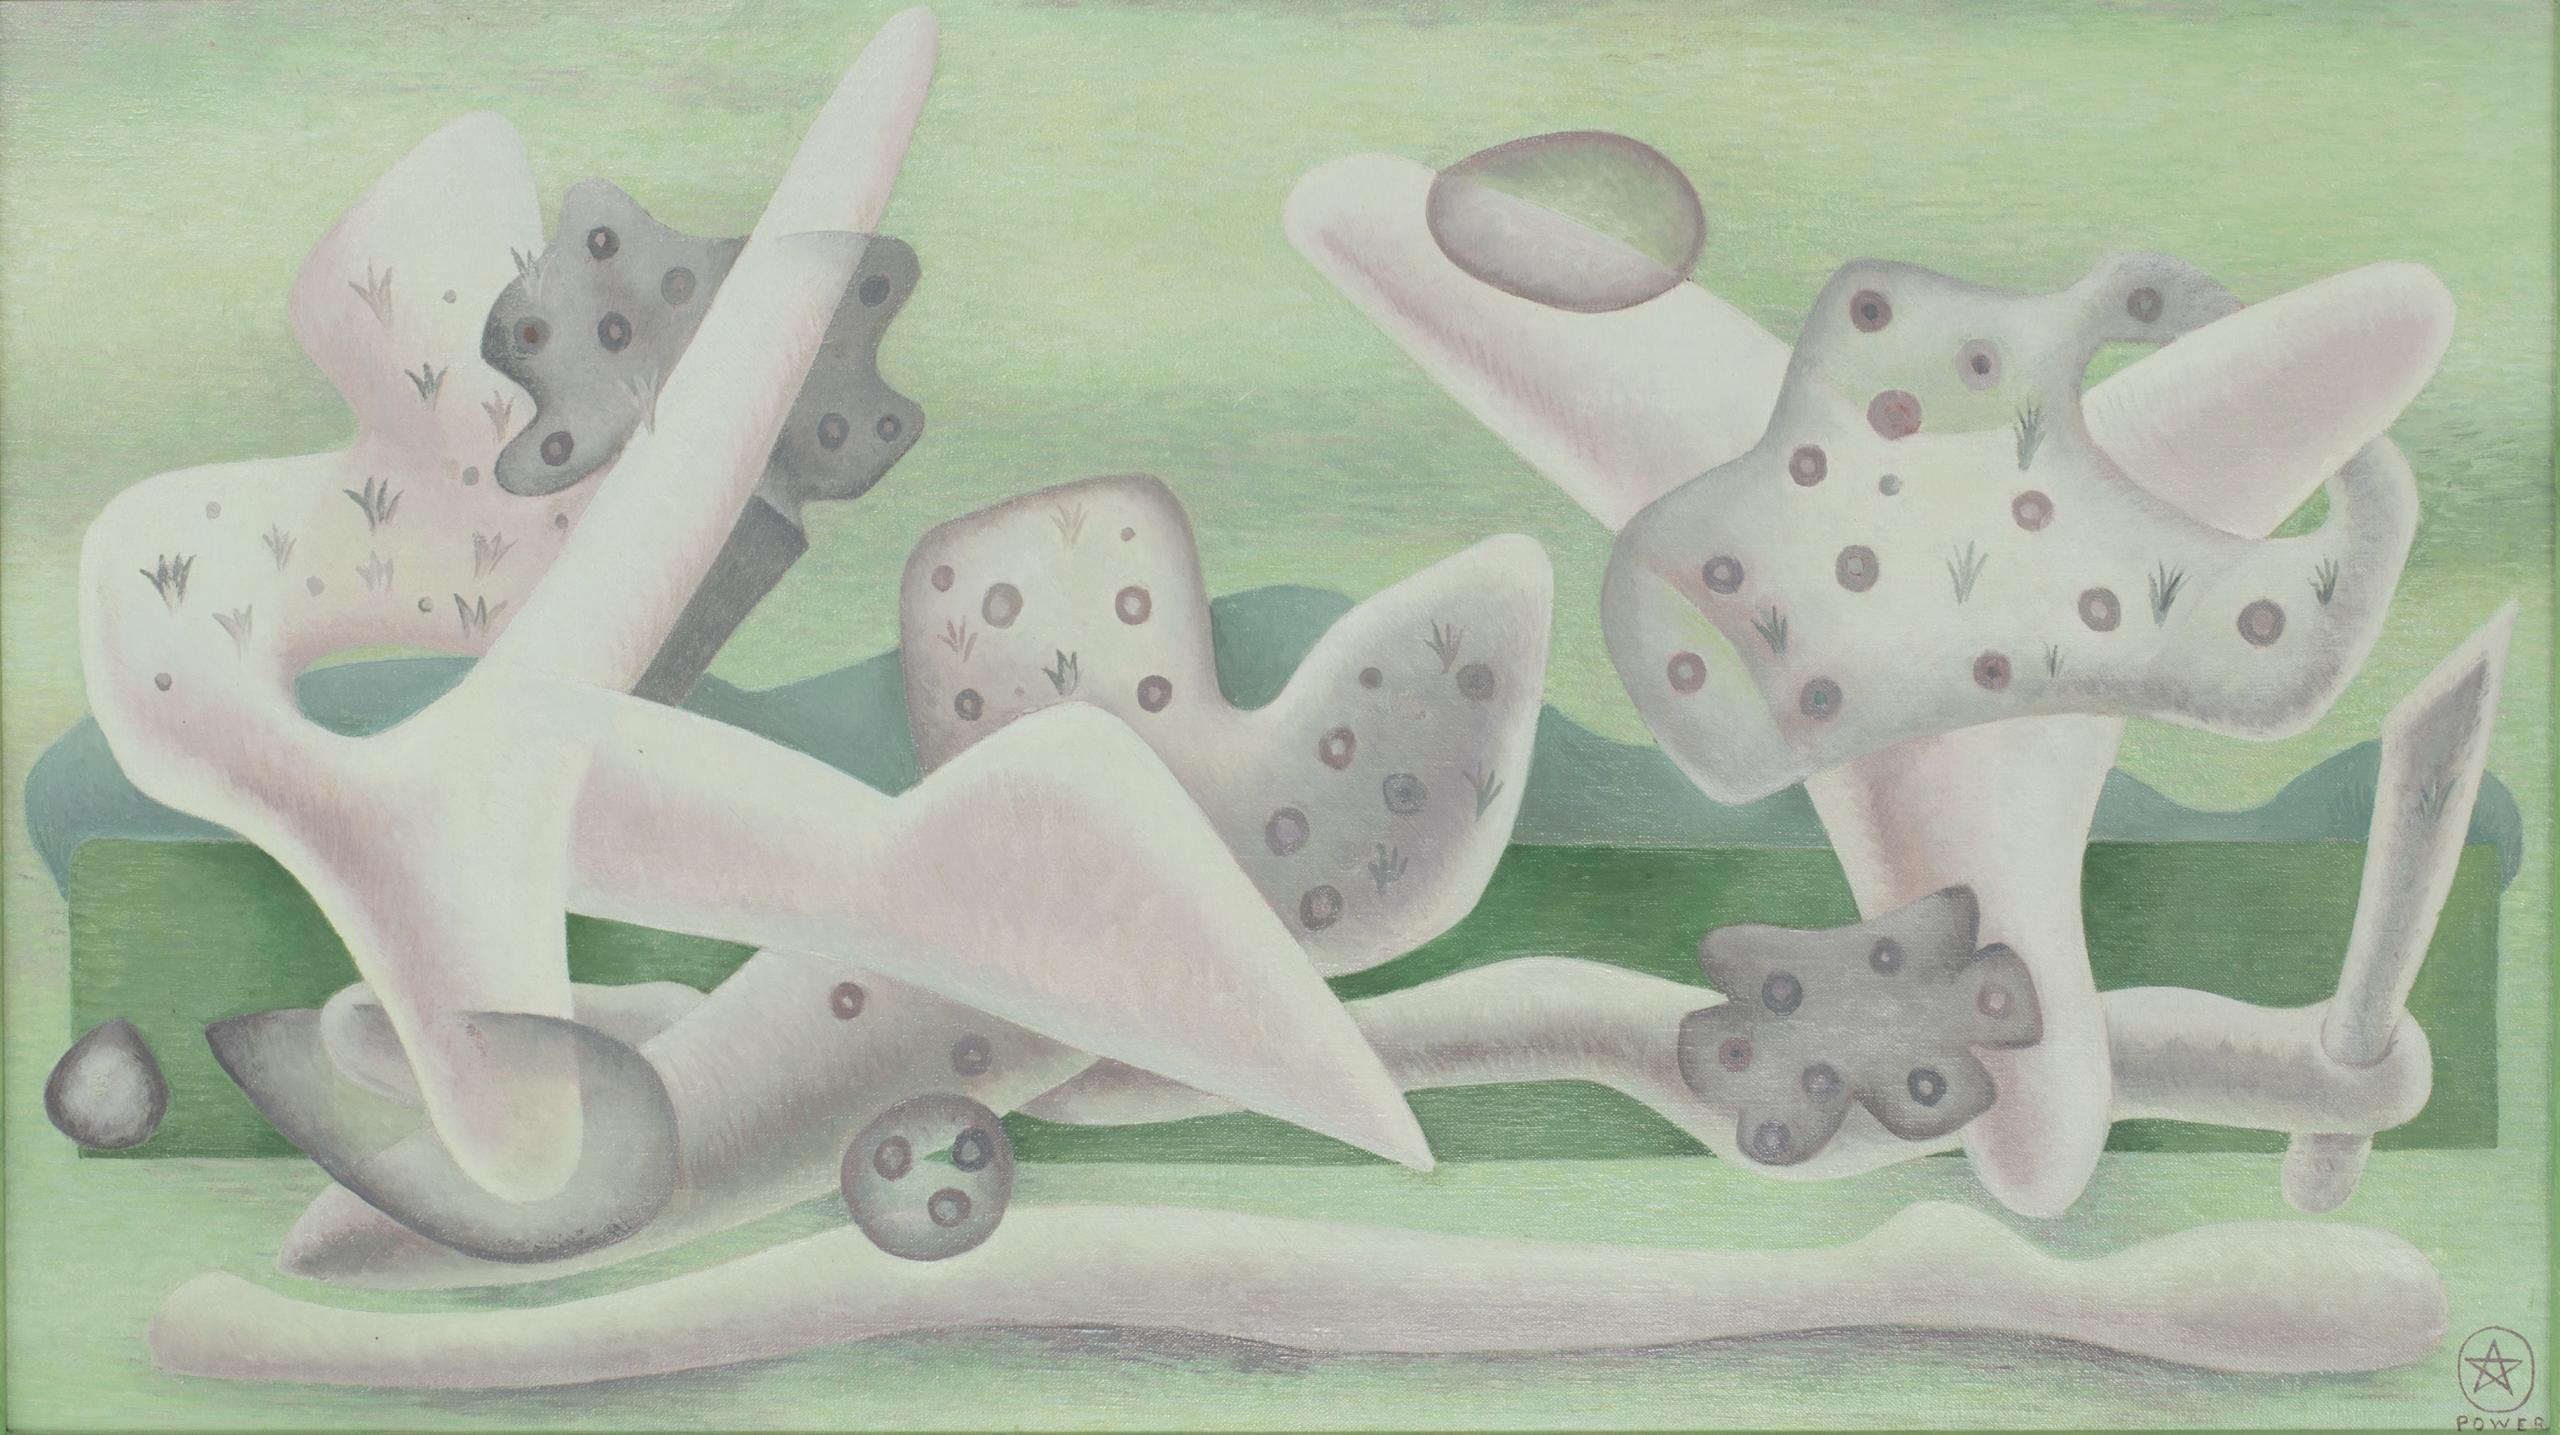 A painting showing a collection of white abstract shapes against a light green background